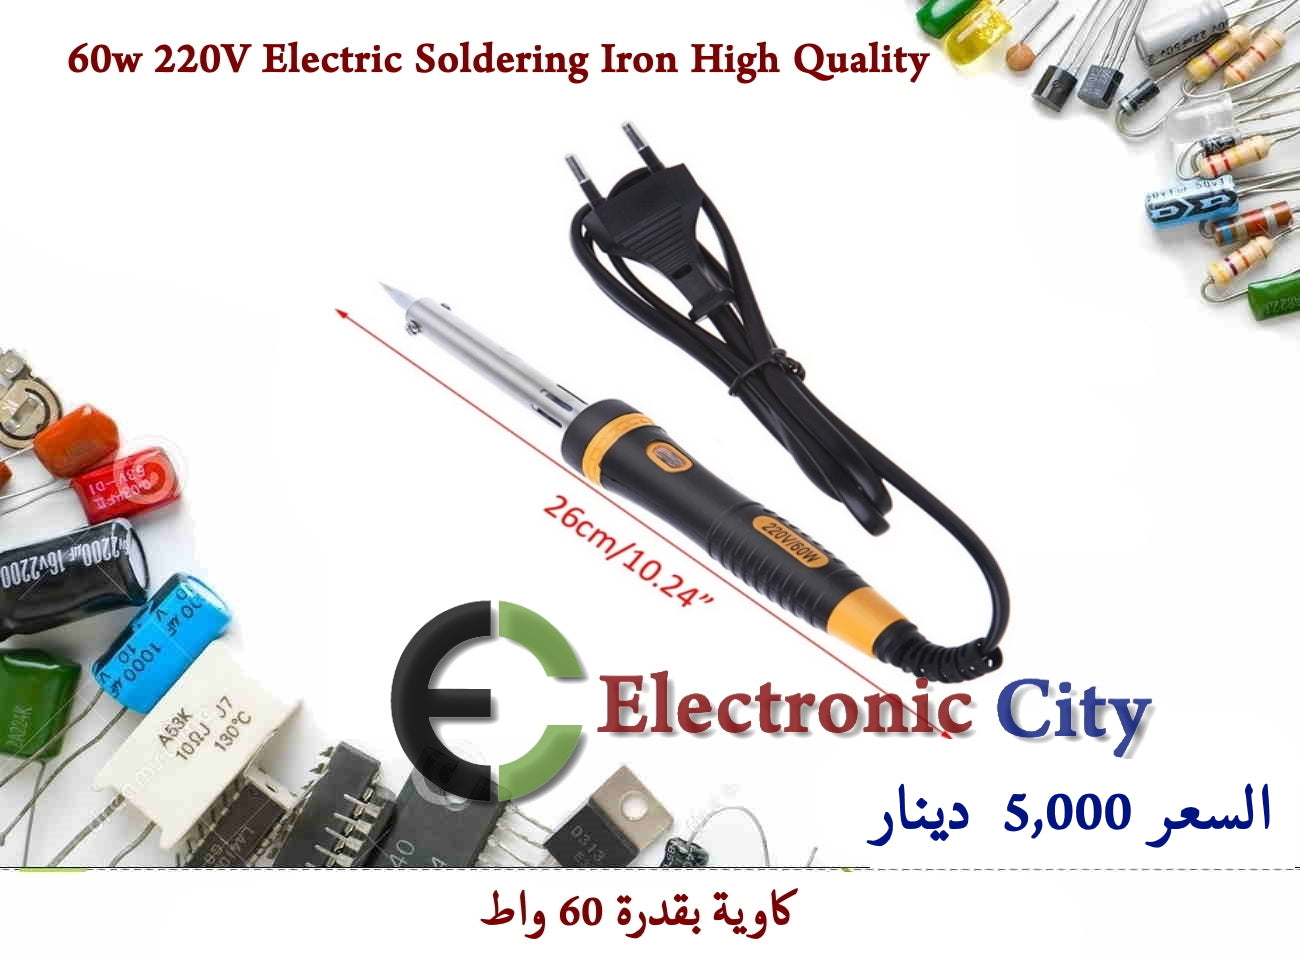 60w 220V Electric Soldering Iron High Quality